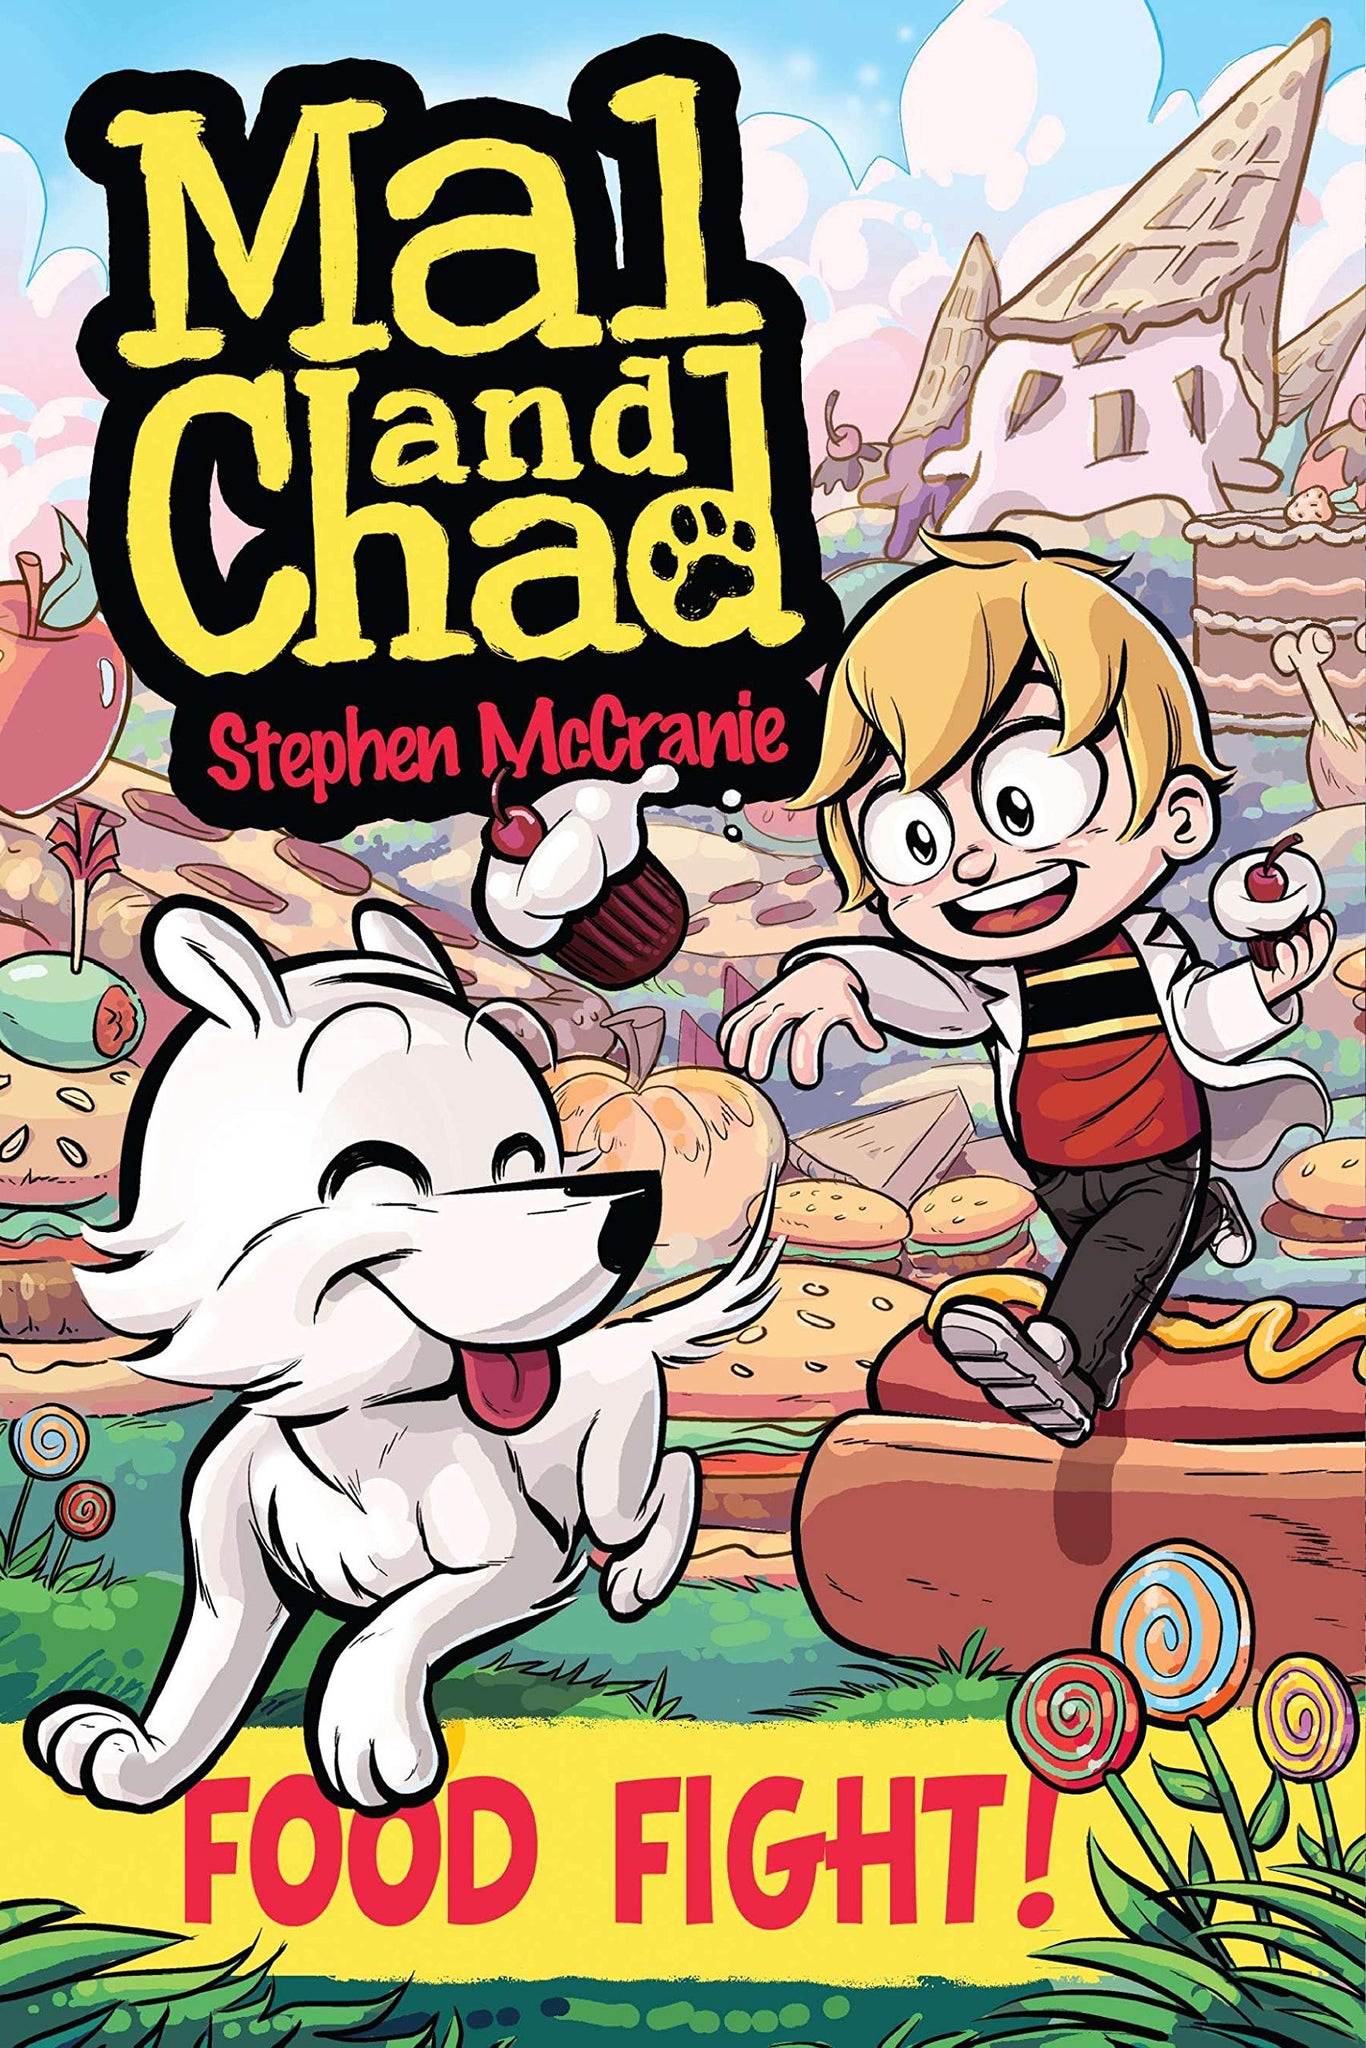 Mal and Chad #2 : Food Fight! - Paperback